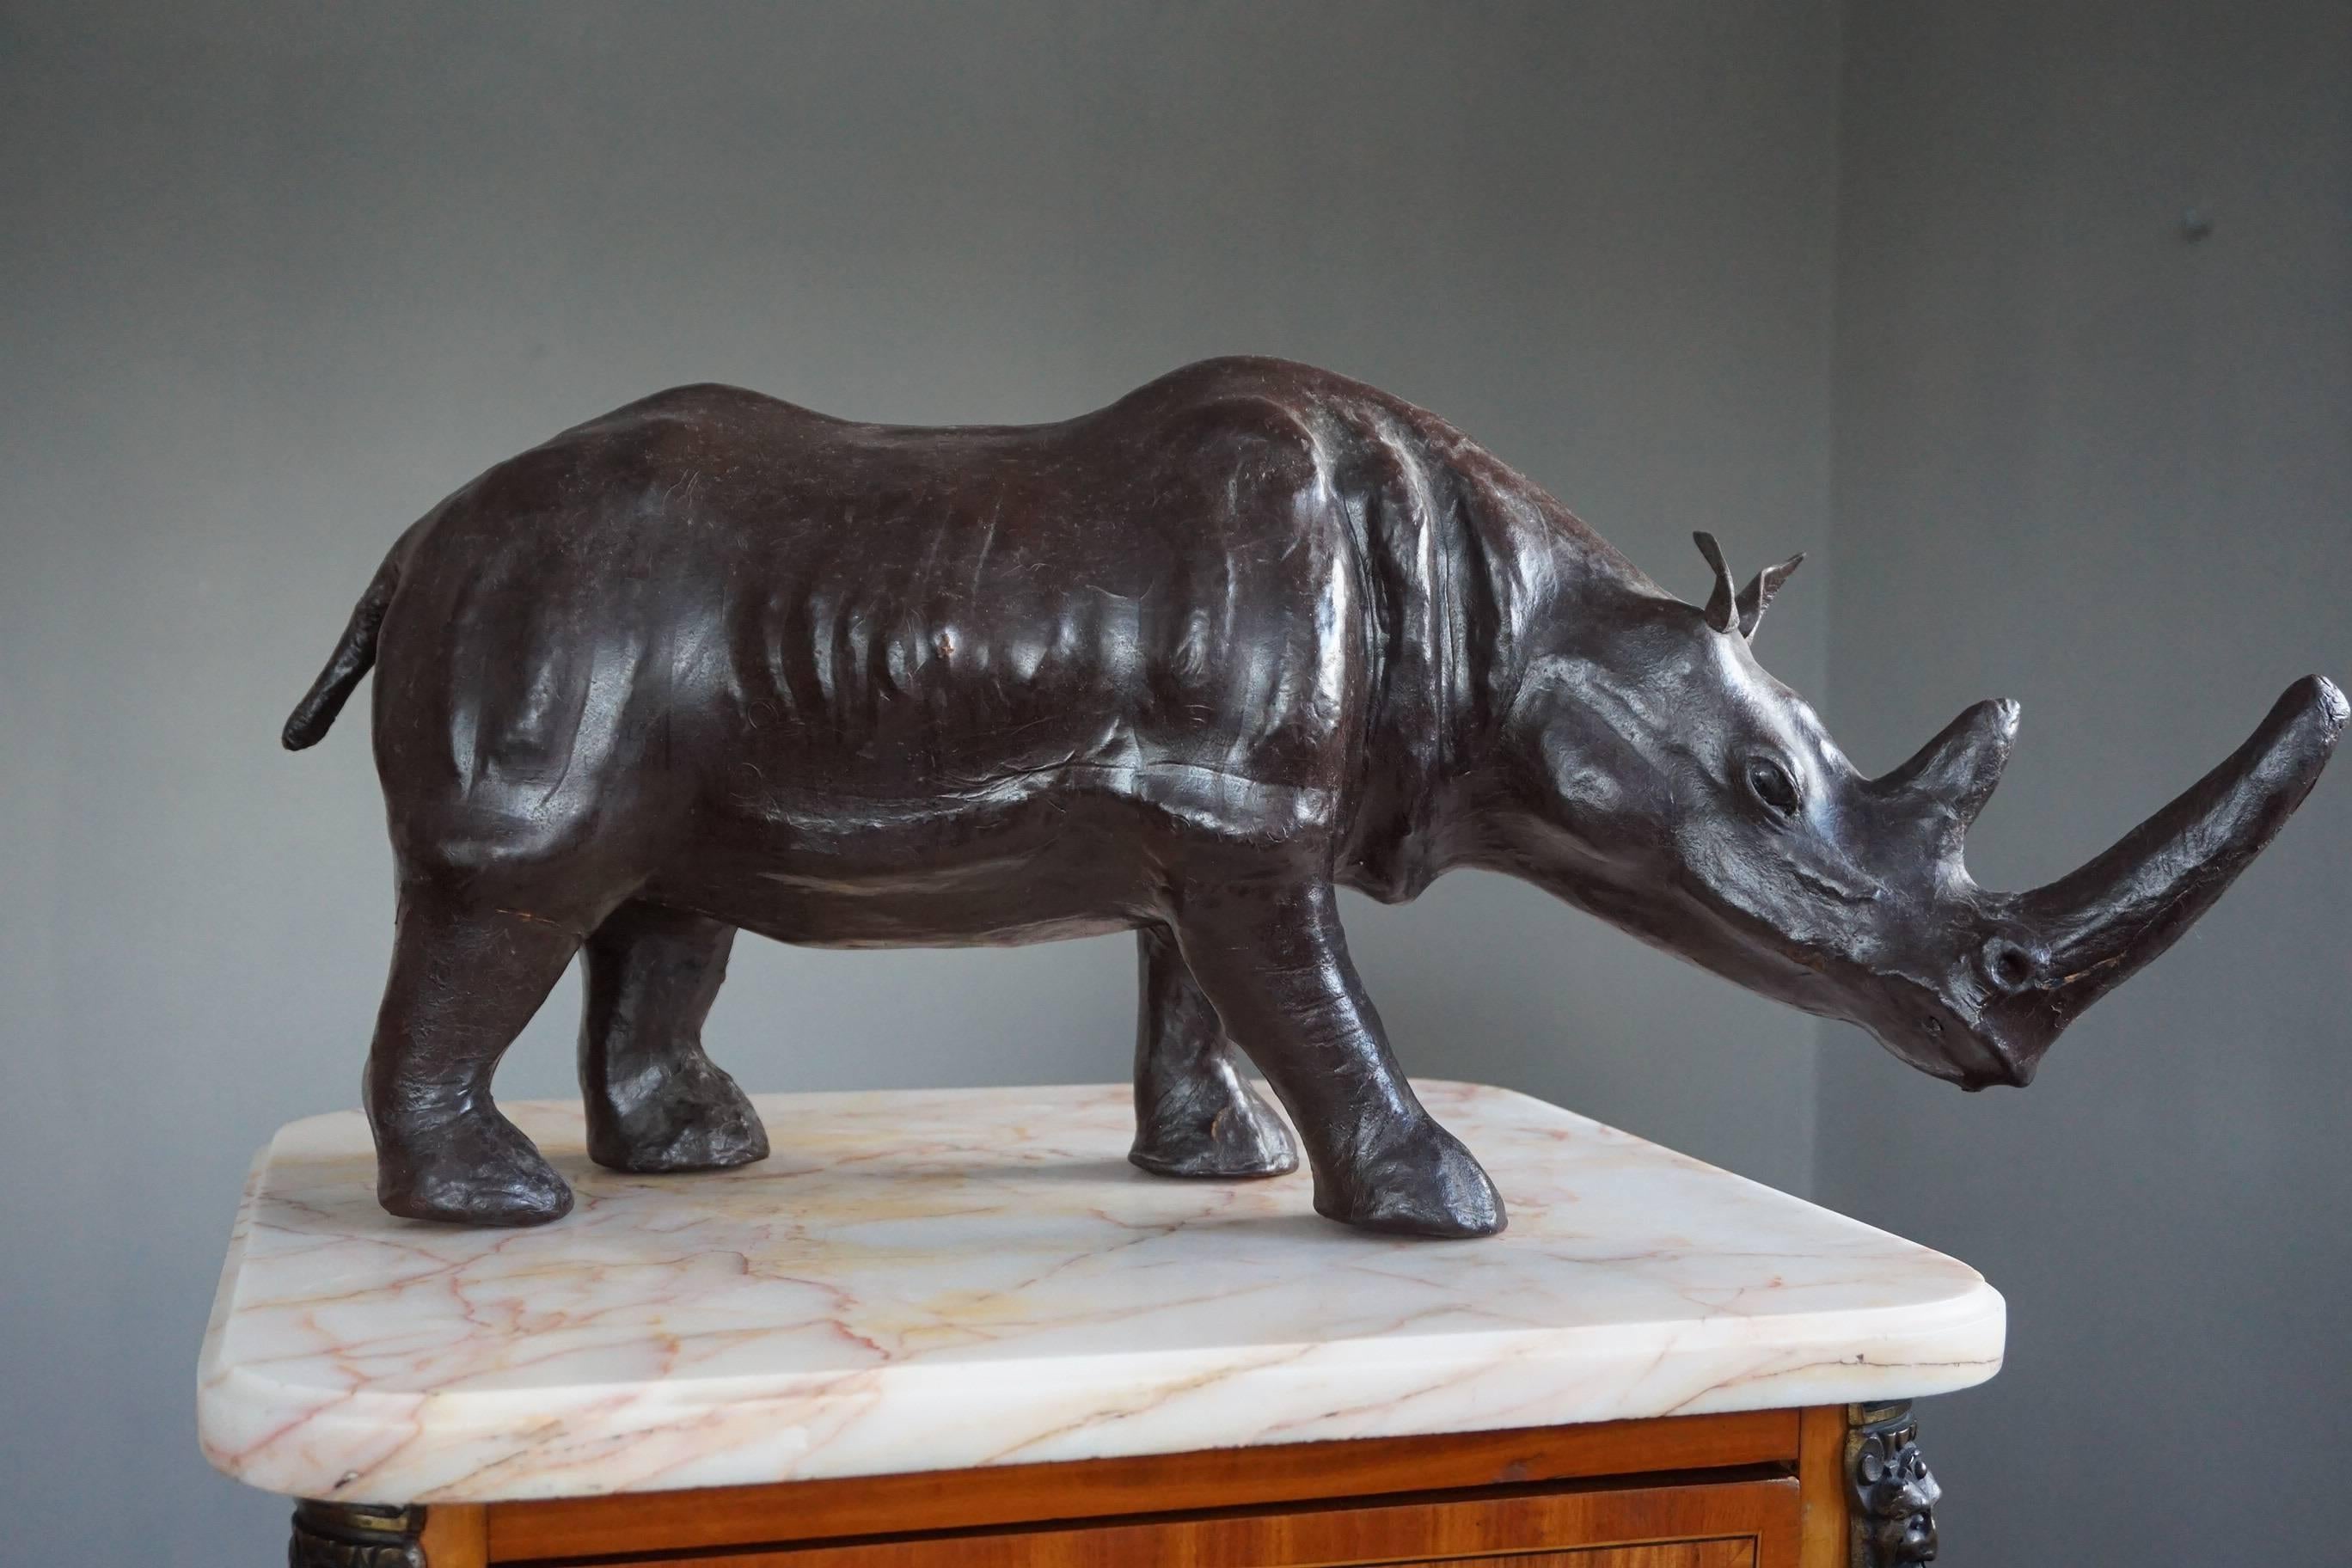 Good size and highly decorative rhinoceros sculpture.

This full-grown and impressive rhino has both great aesthetic and decorative value. Underneath the leather hide is a well carved wooden sculpture which is why this sizable rhino has such